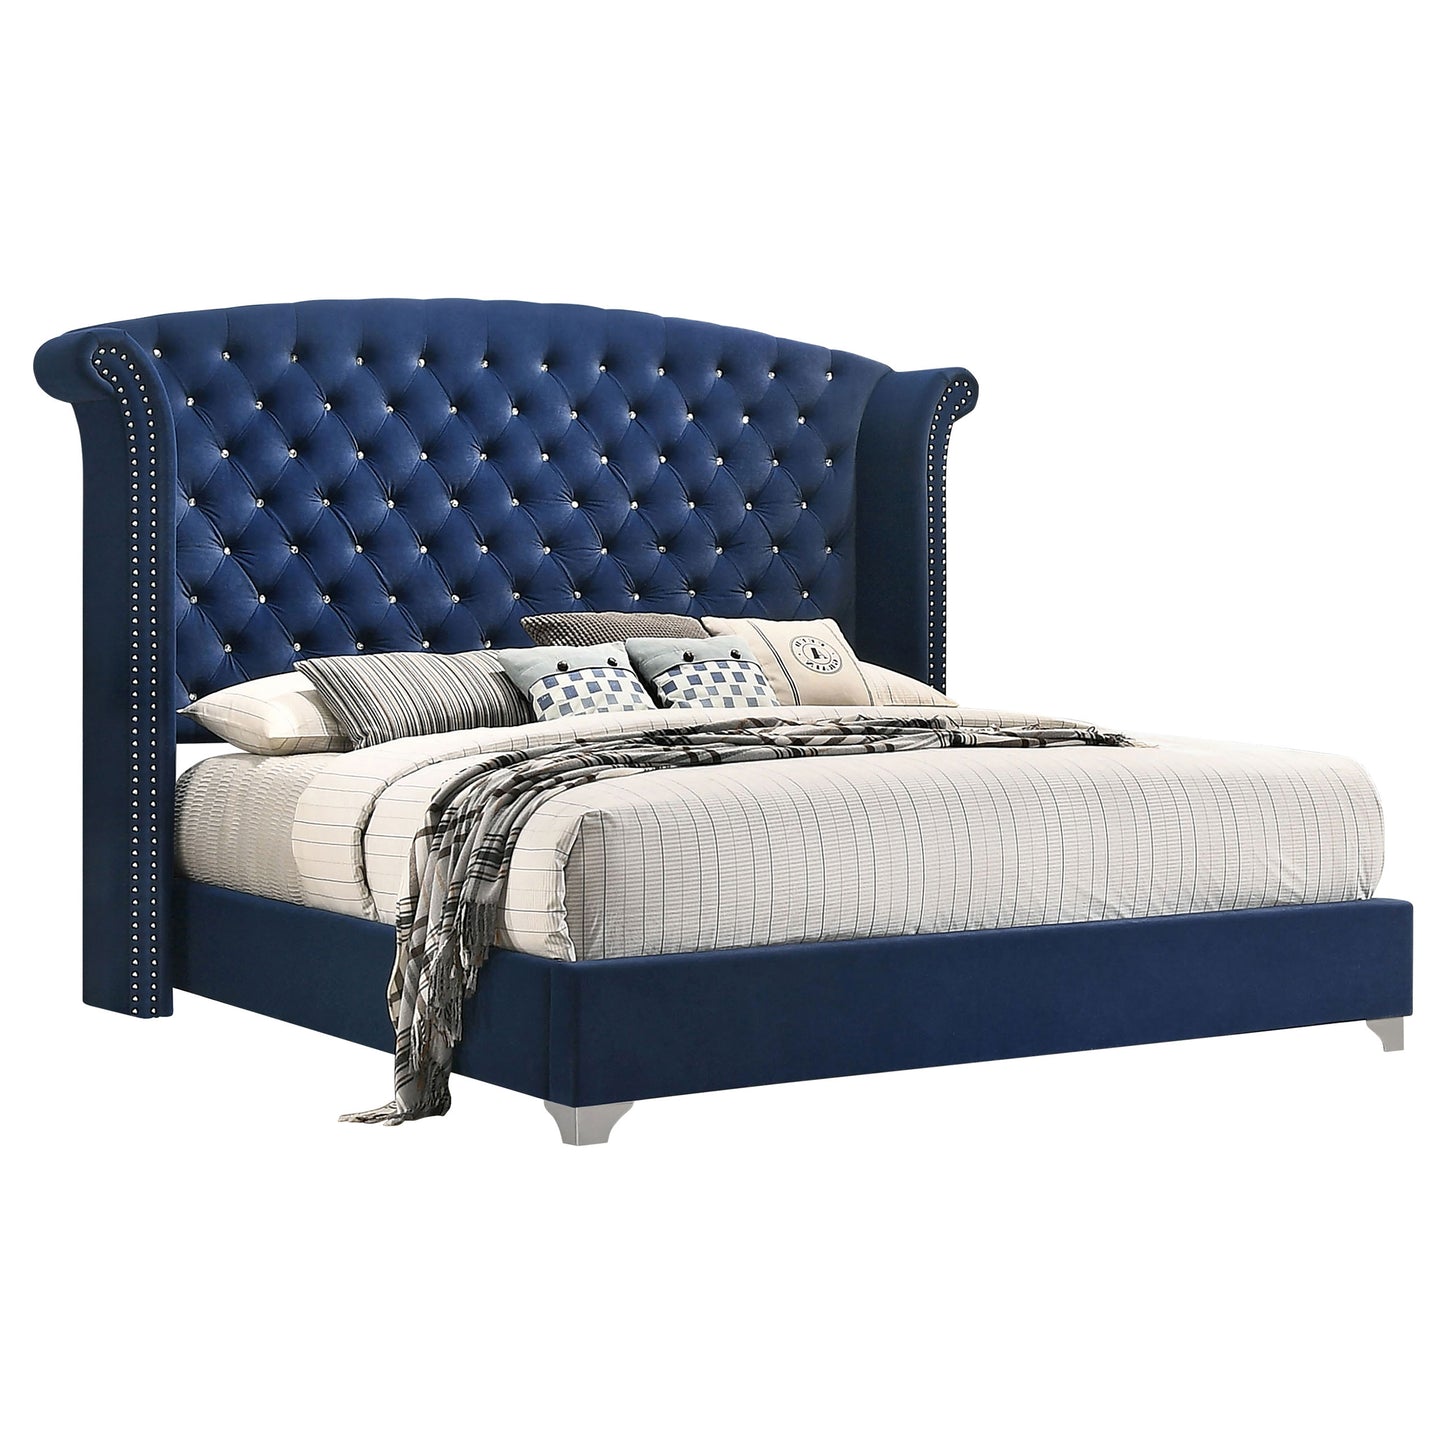 Melody 4-piece Eastern King Bedroom Set Pacific Blue